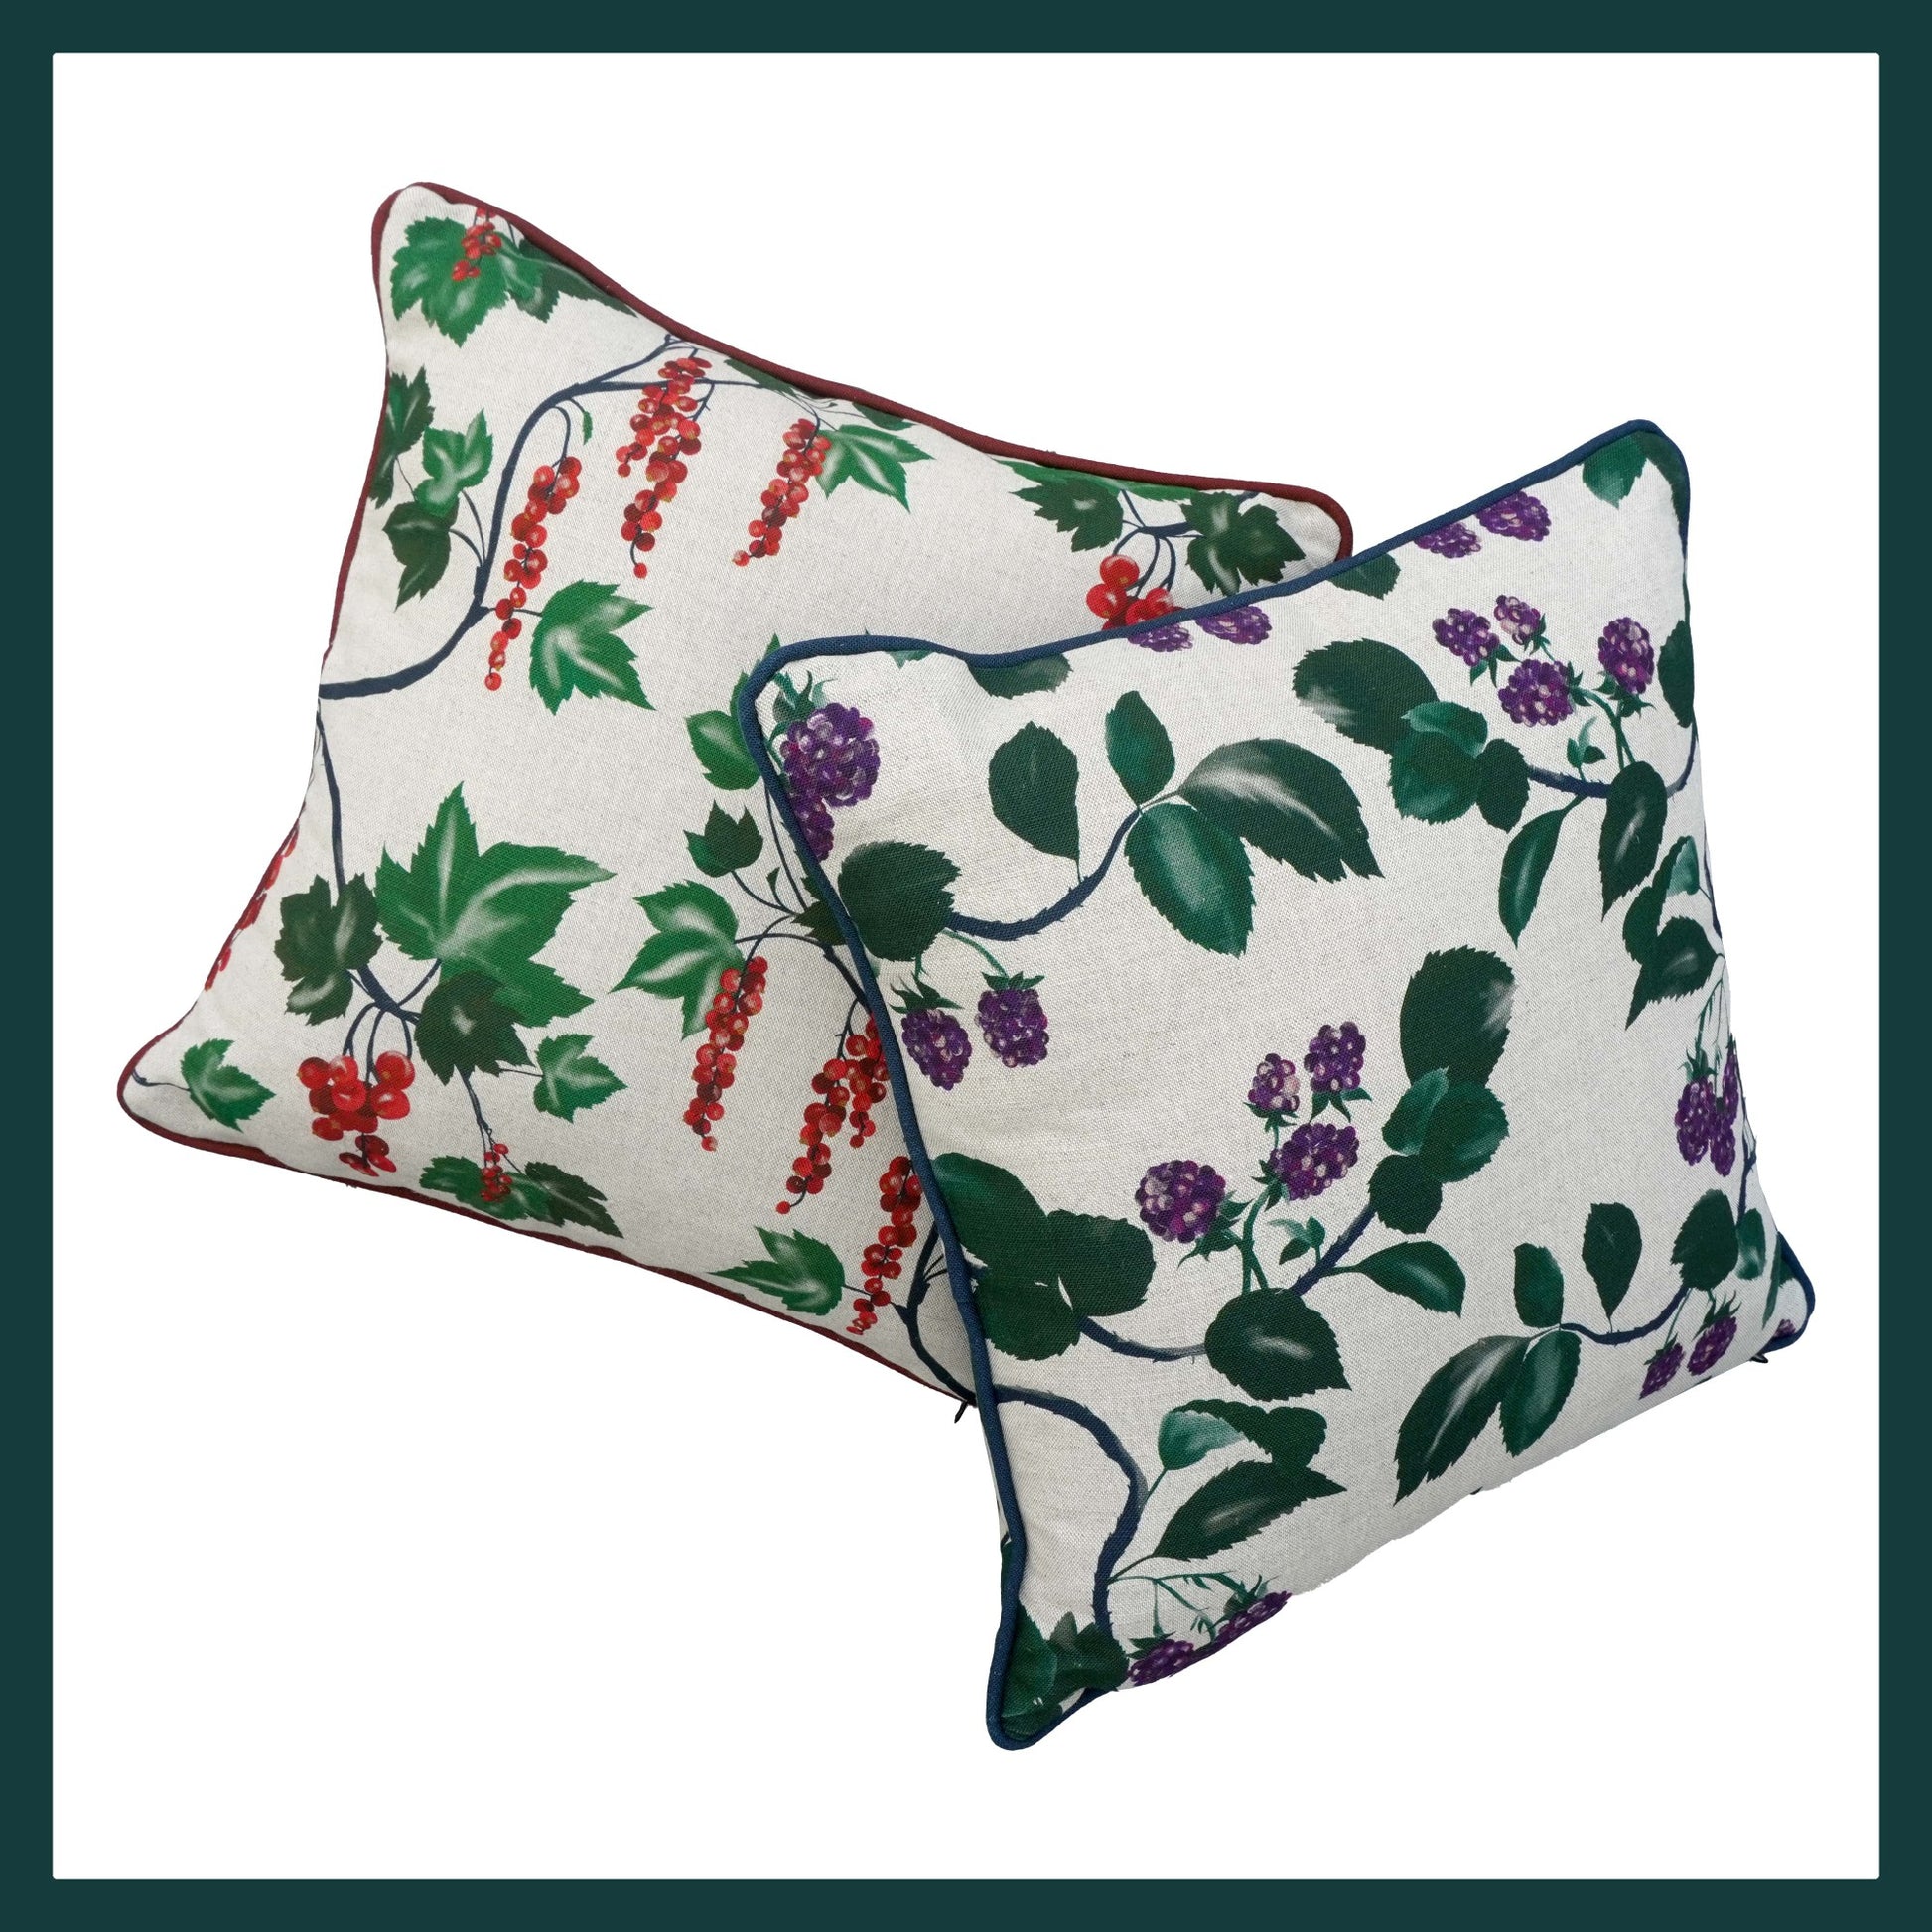 Redcurrant and blackberry scatter cushion